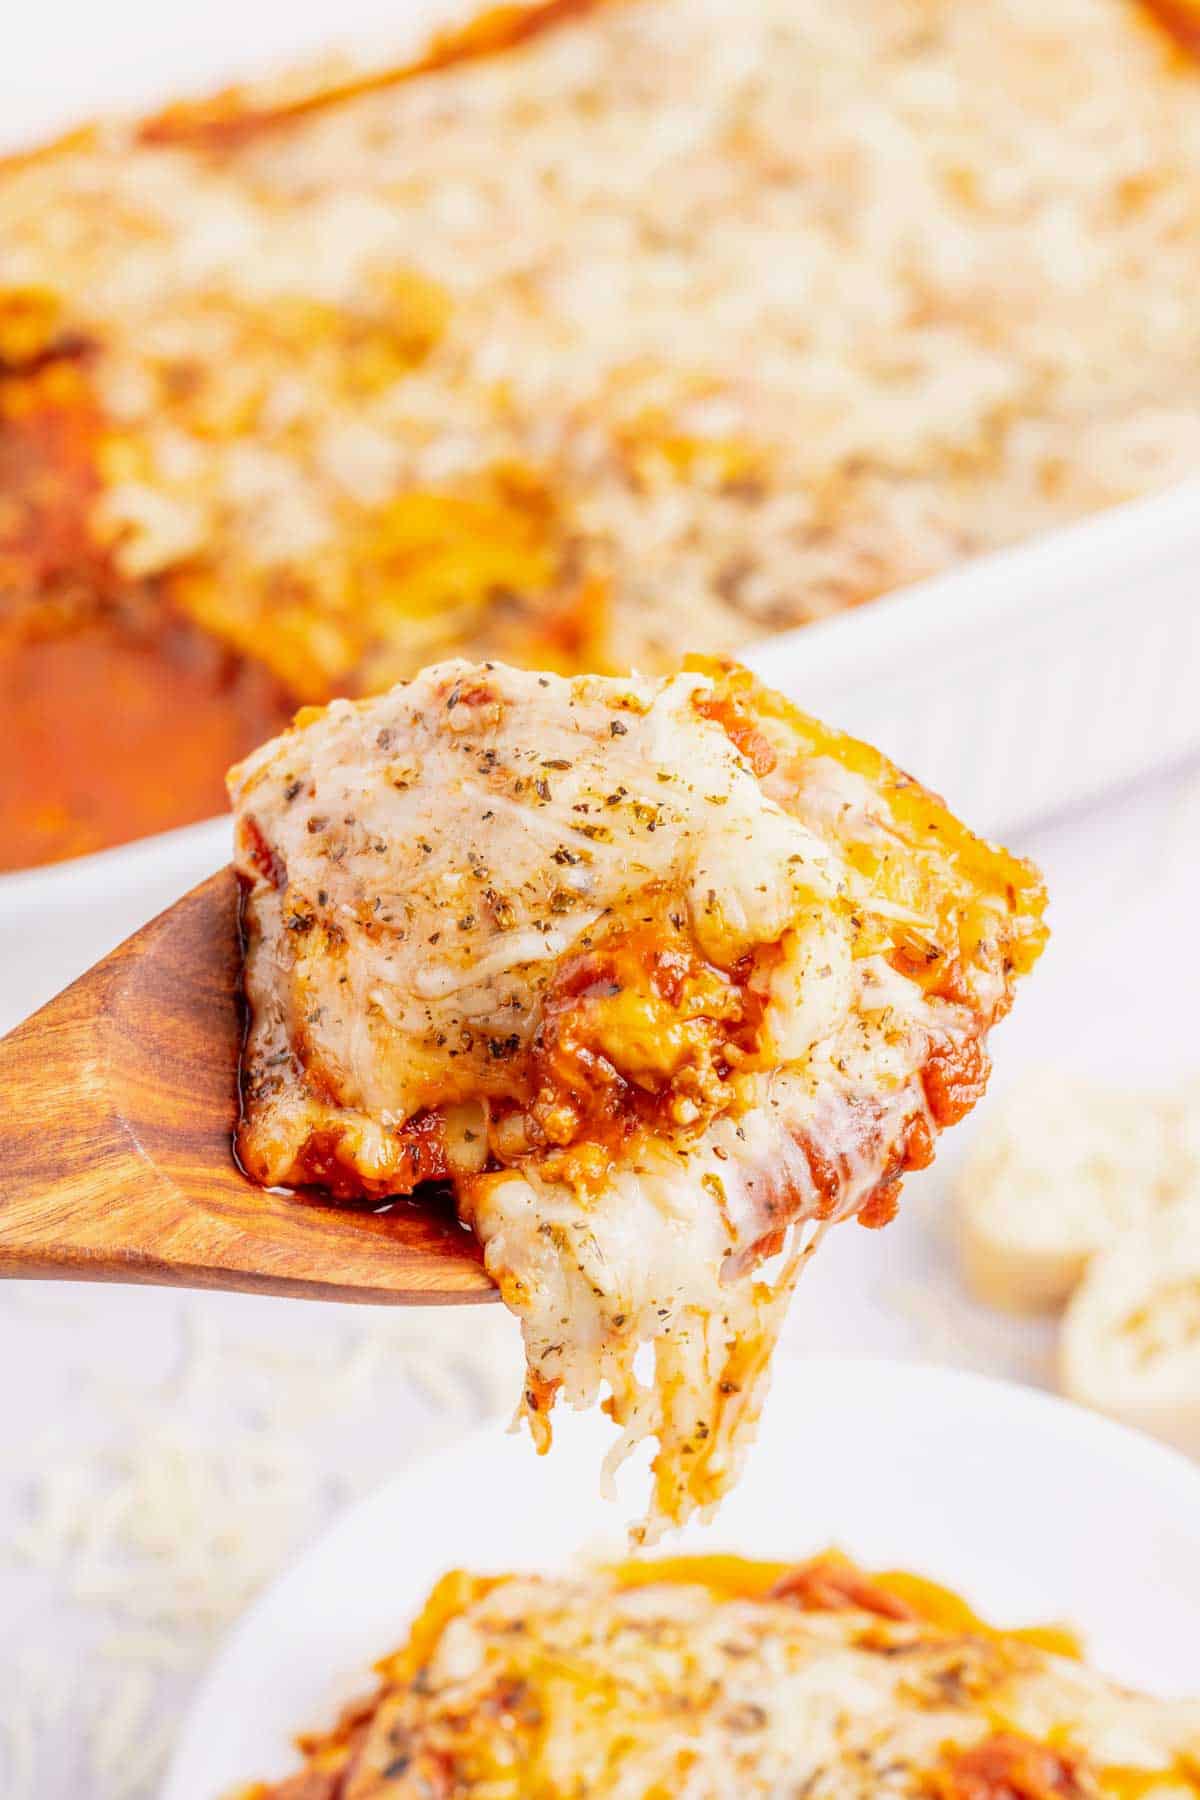 Lazy Lasagna with Ravioli is a hearty and delicious baked pasta recipe made with frozen cheese ravioli, ground beef, marinara and loaded with mozzarella cheese.